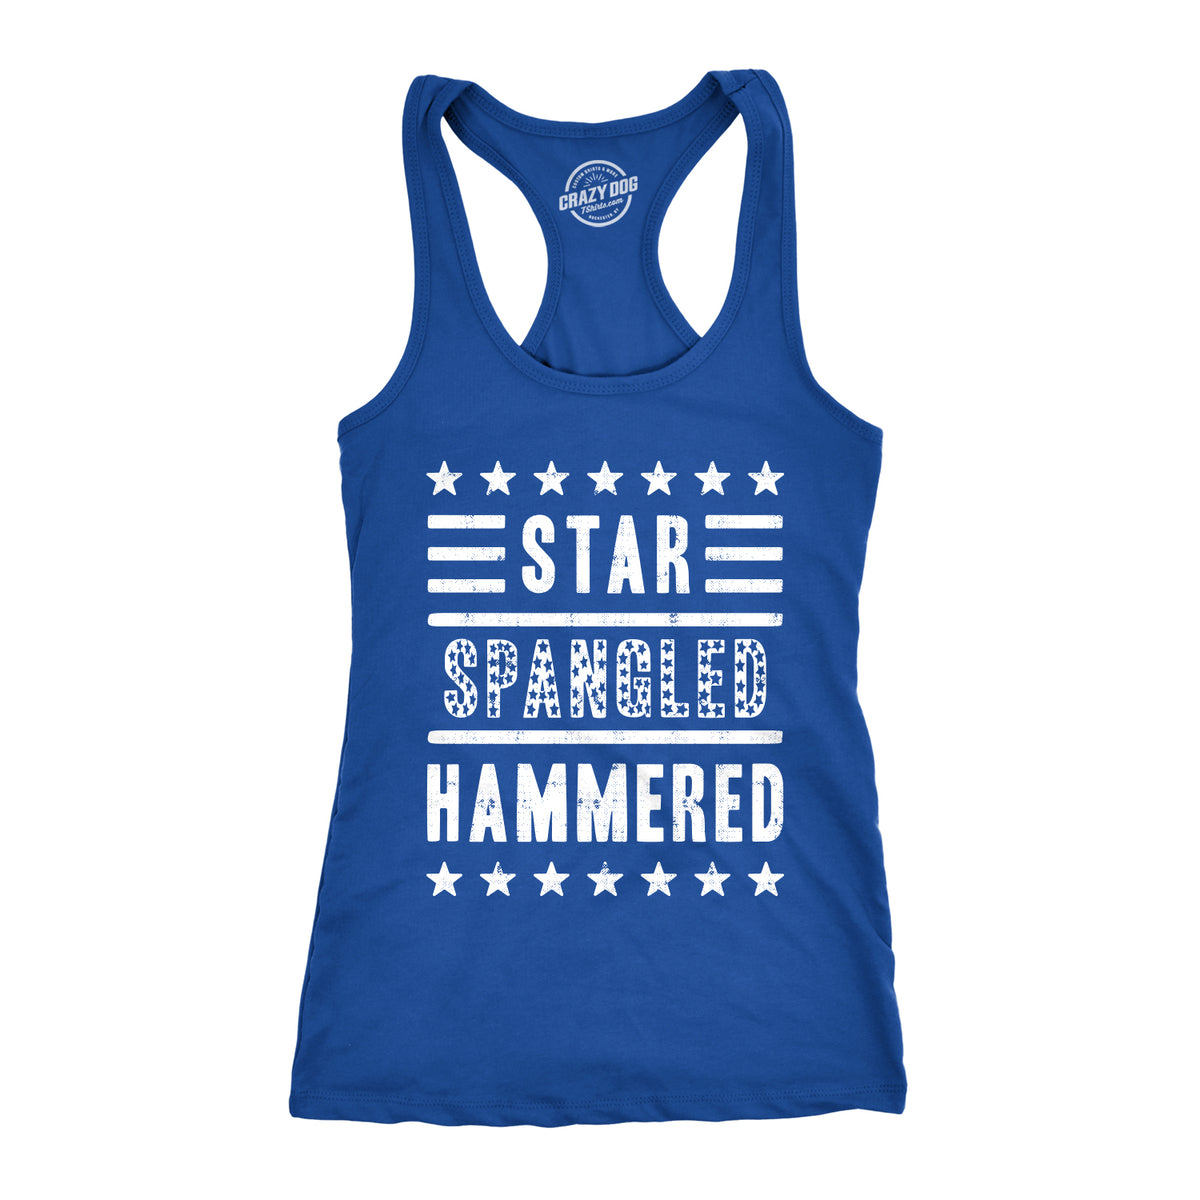 Funny Royal Star Spangled Hammered Womens Tank Top Nerdy Fourth of July Drinking Tee